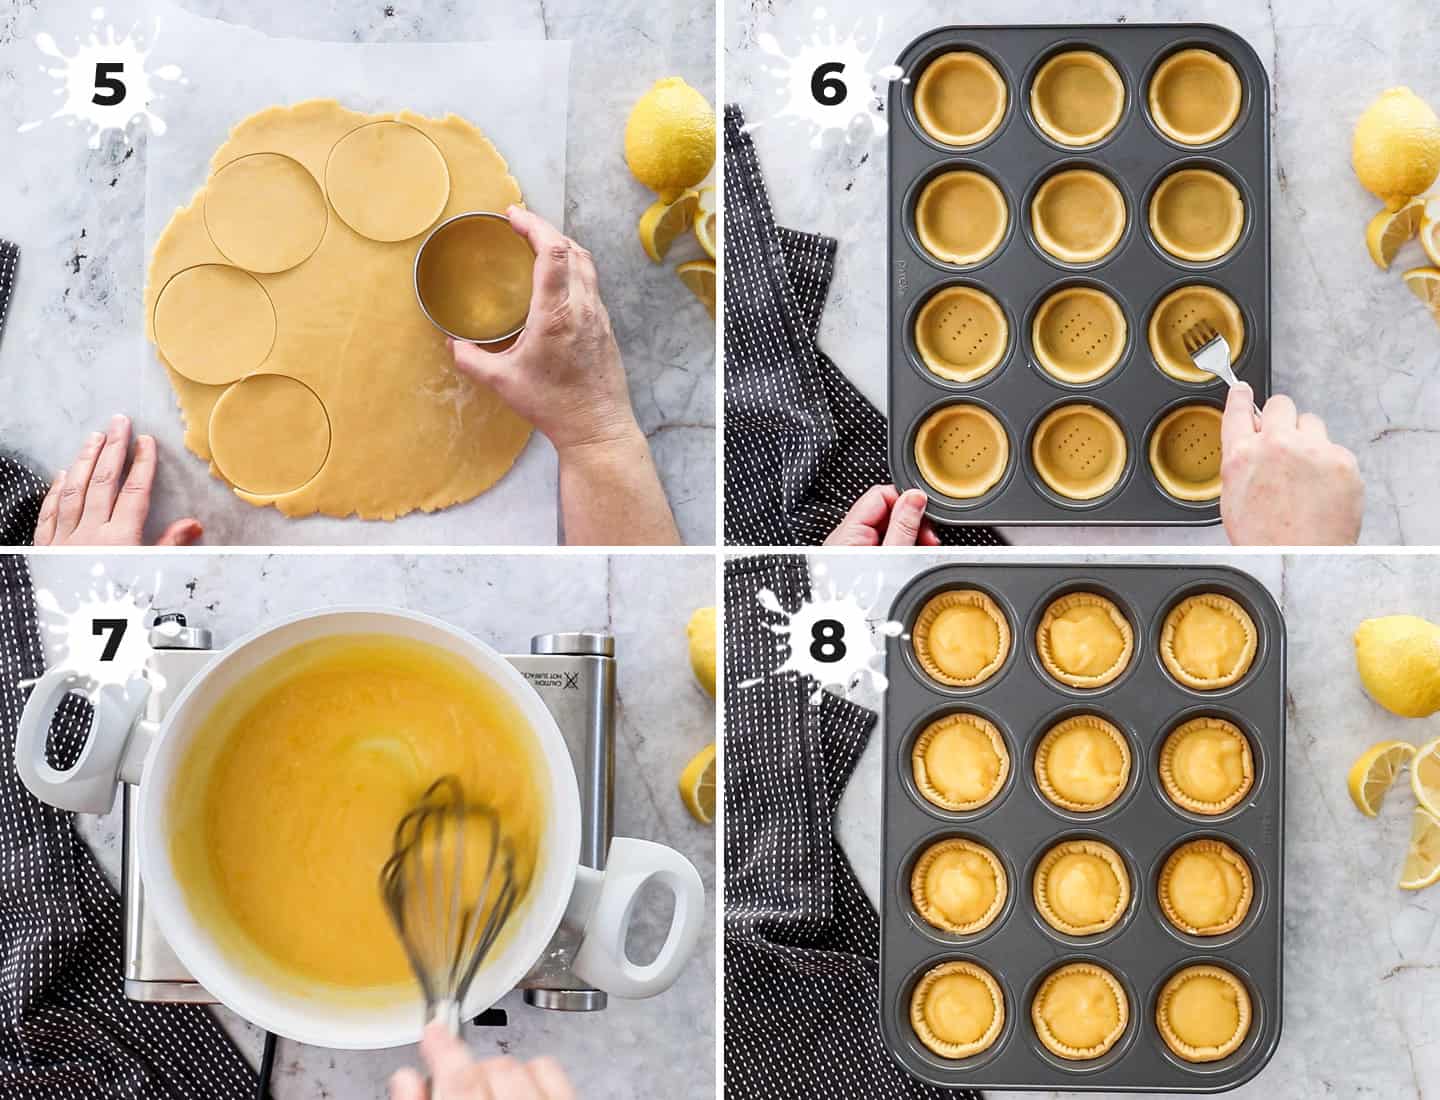 A collage of 4 images showing how to assemble lemon tartlets.